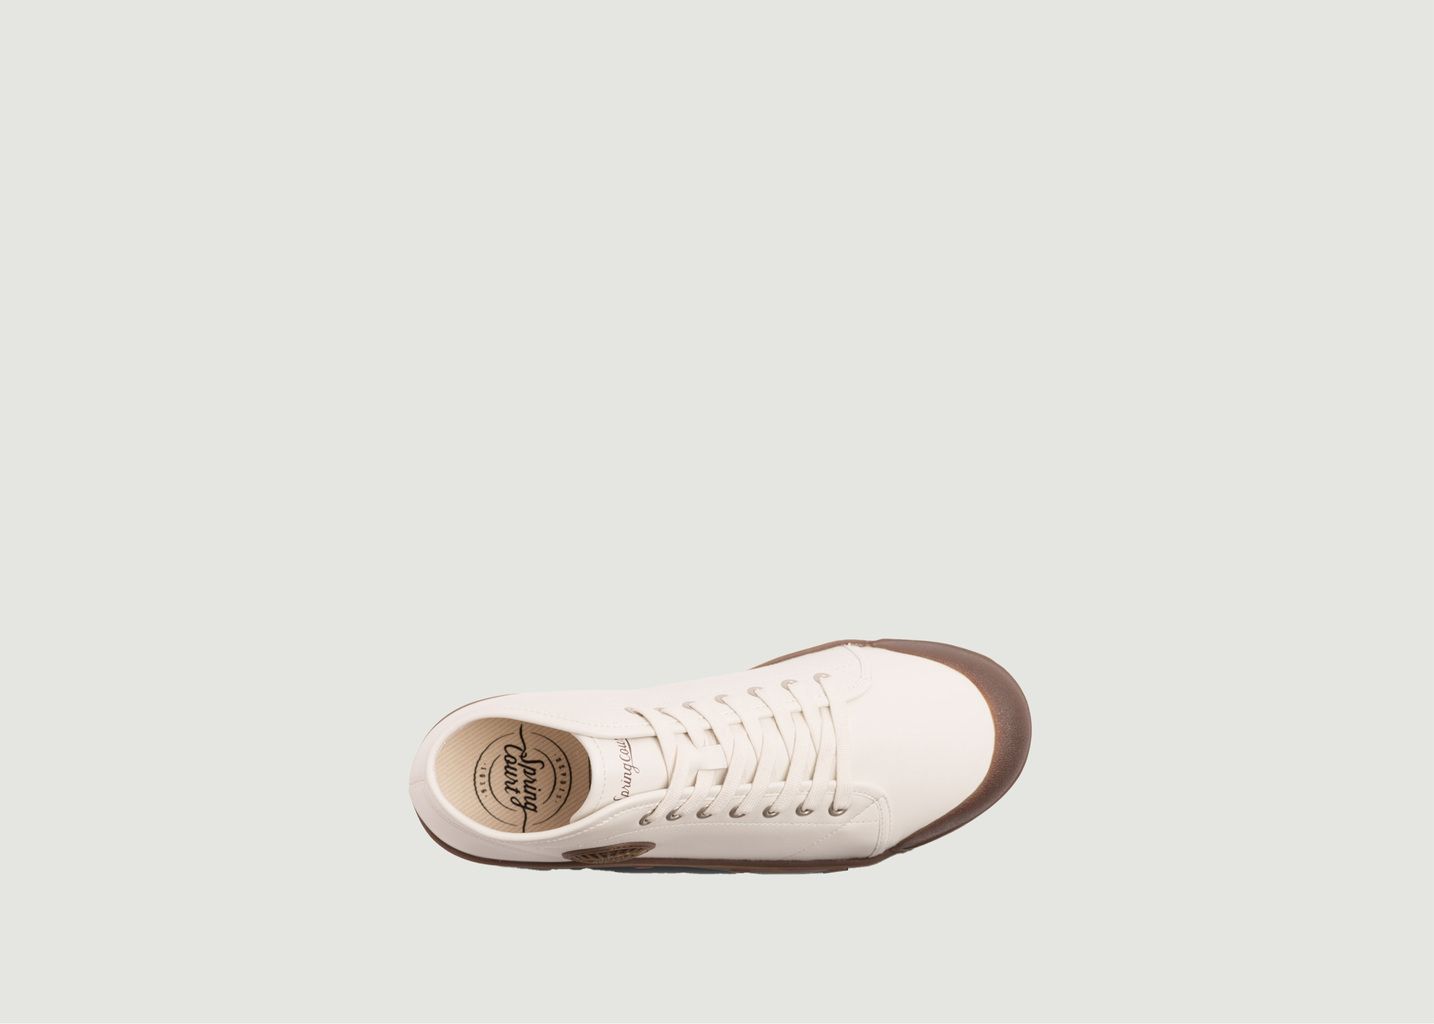 Hohe Sneakers B2 - Spring Court